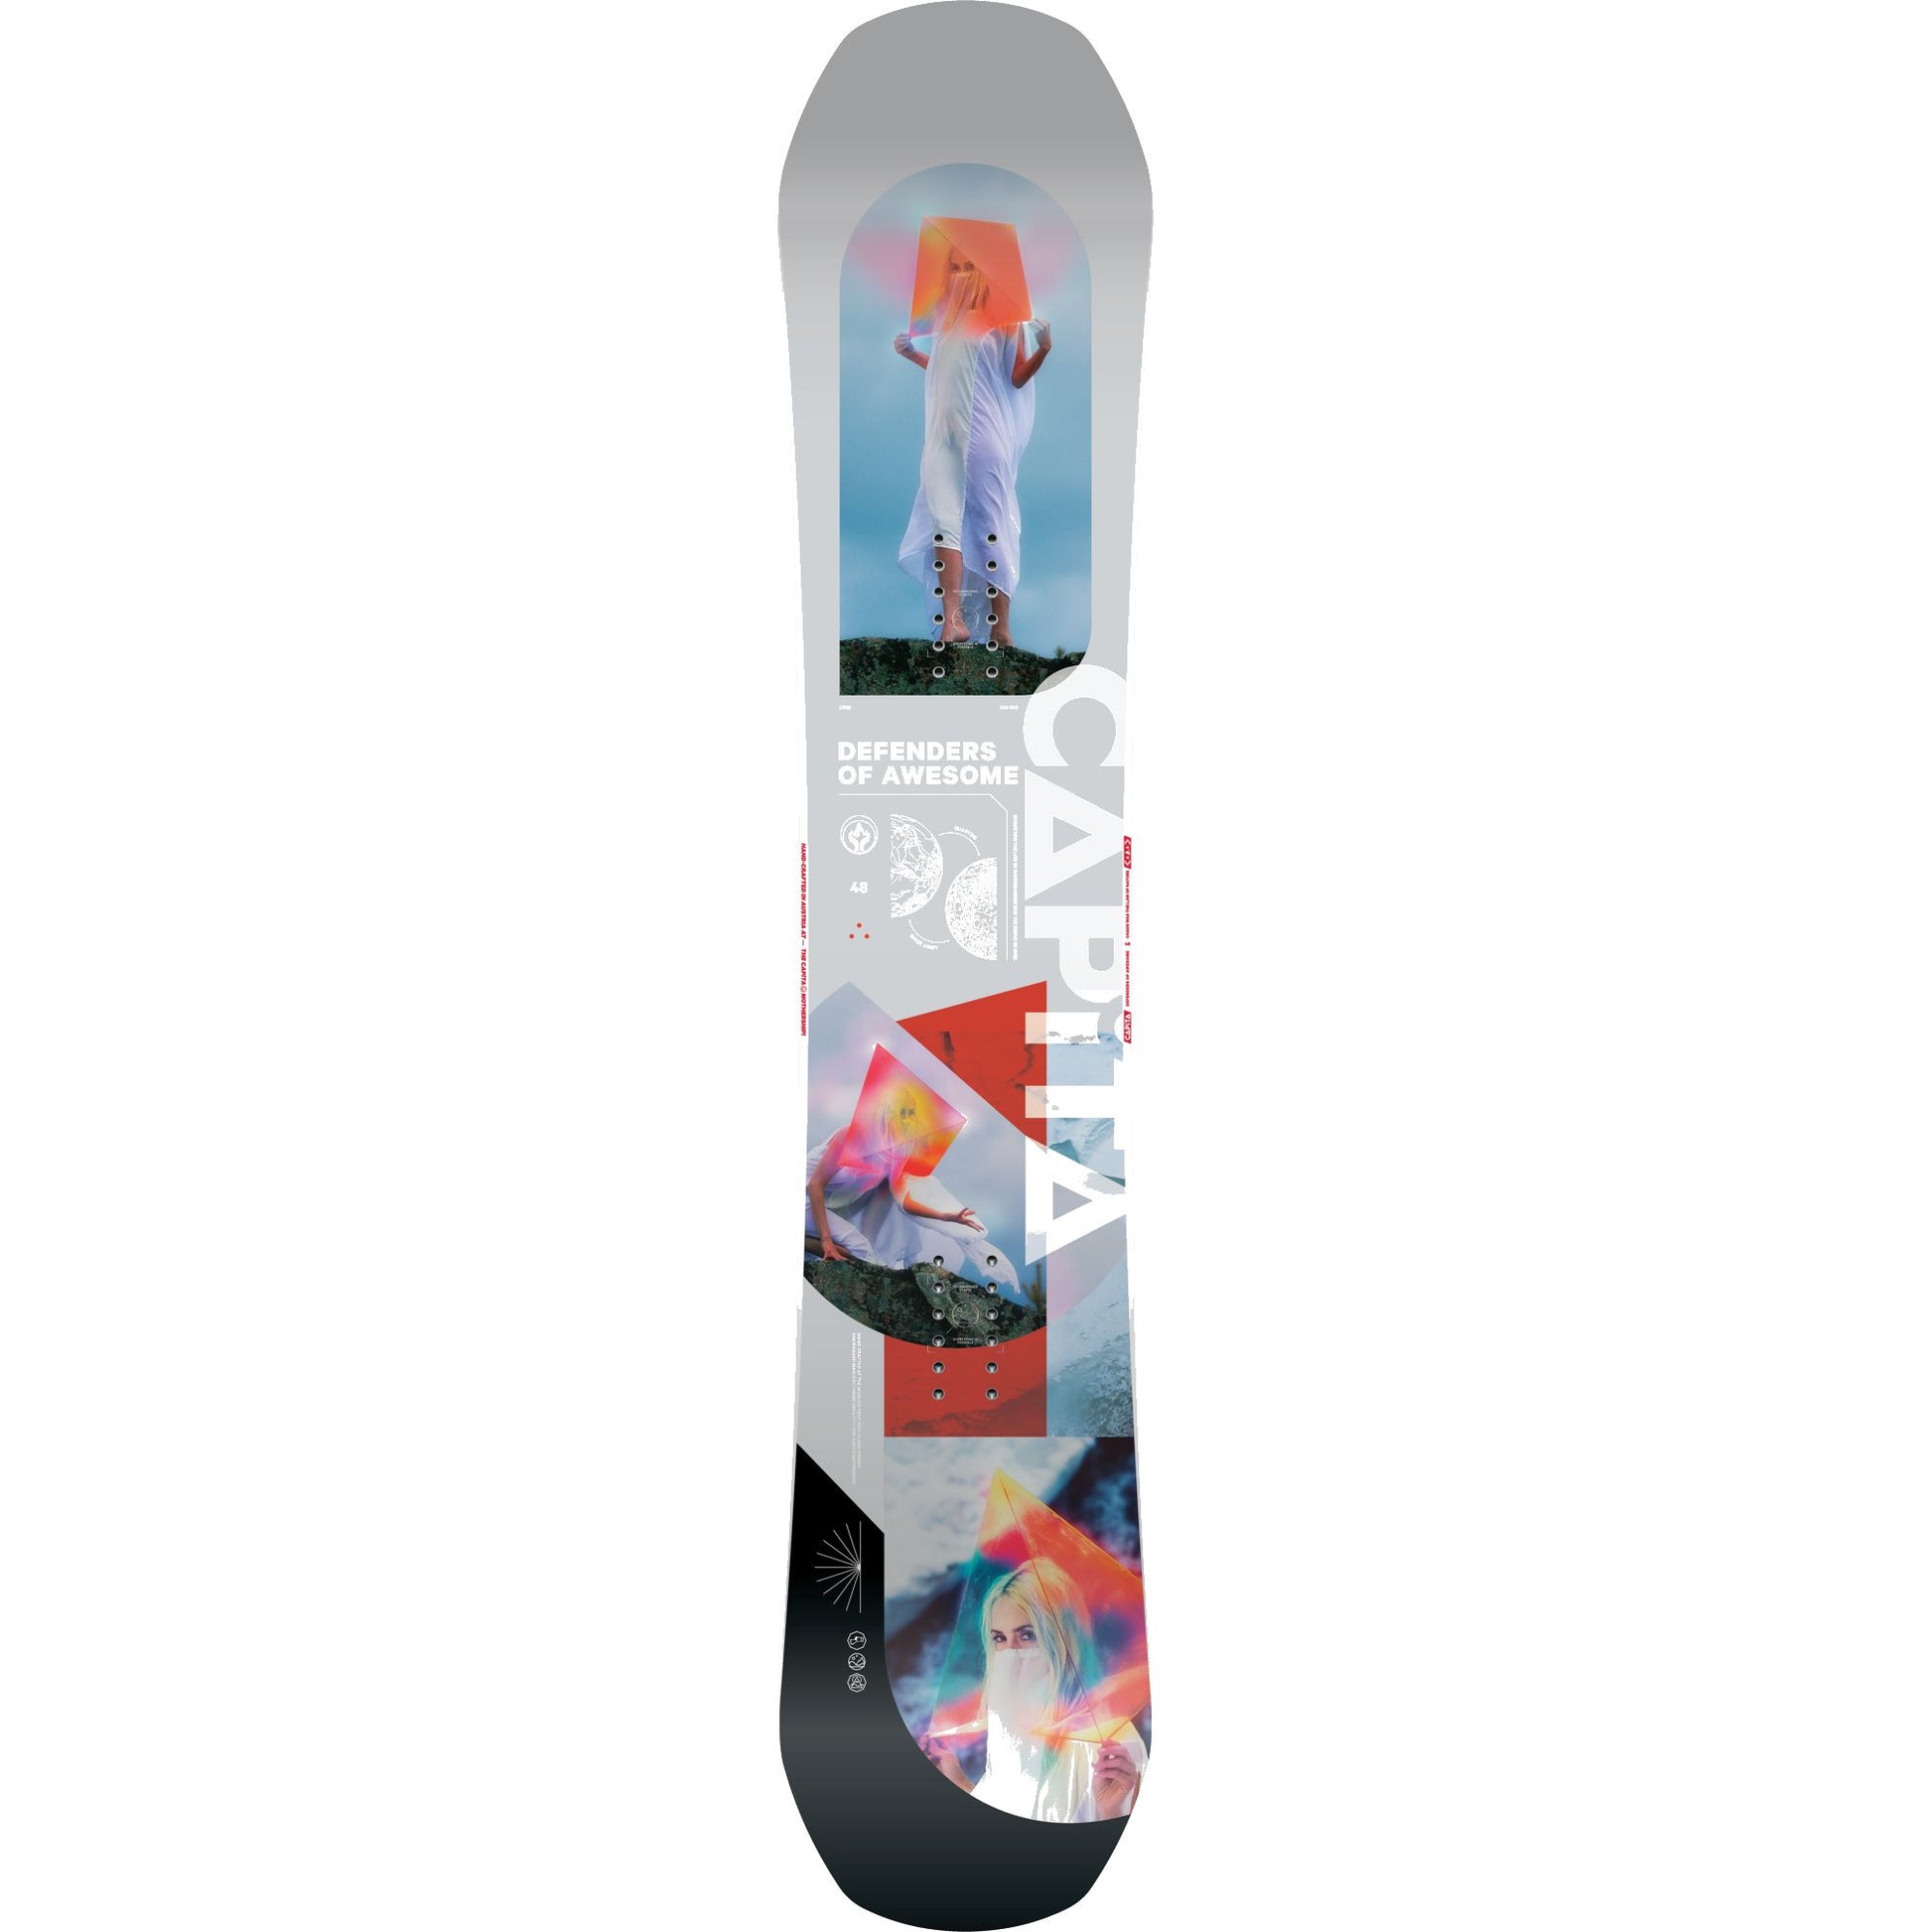 Capita Men's Defenders Of Awesome Snowboard 148 Snowboards